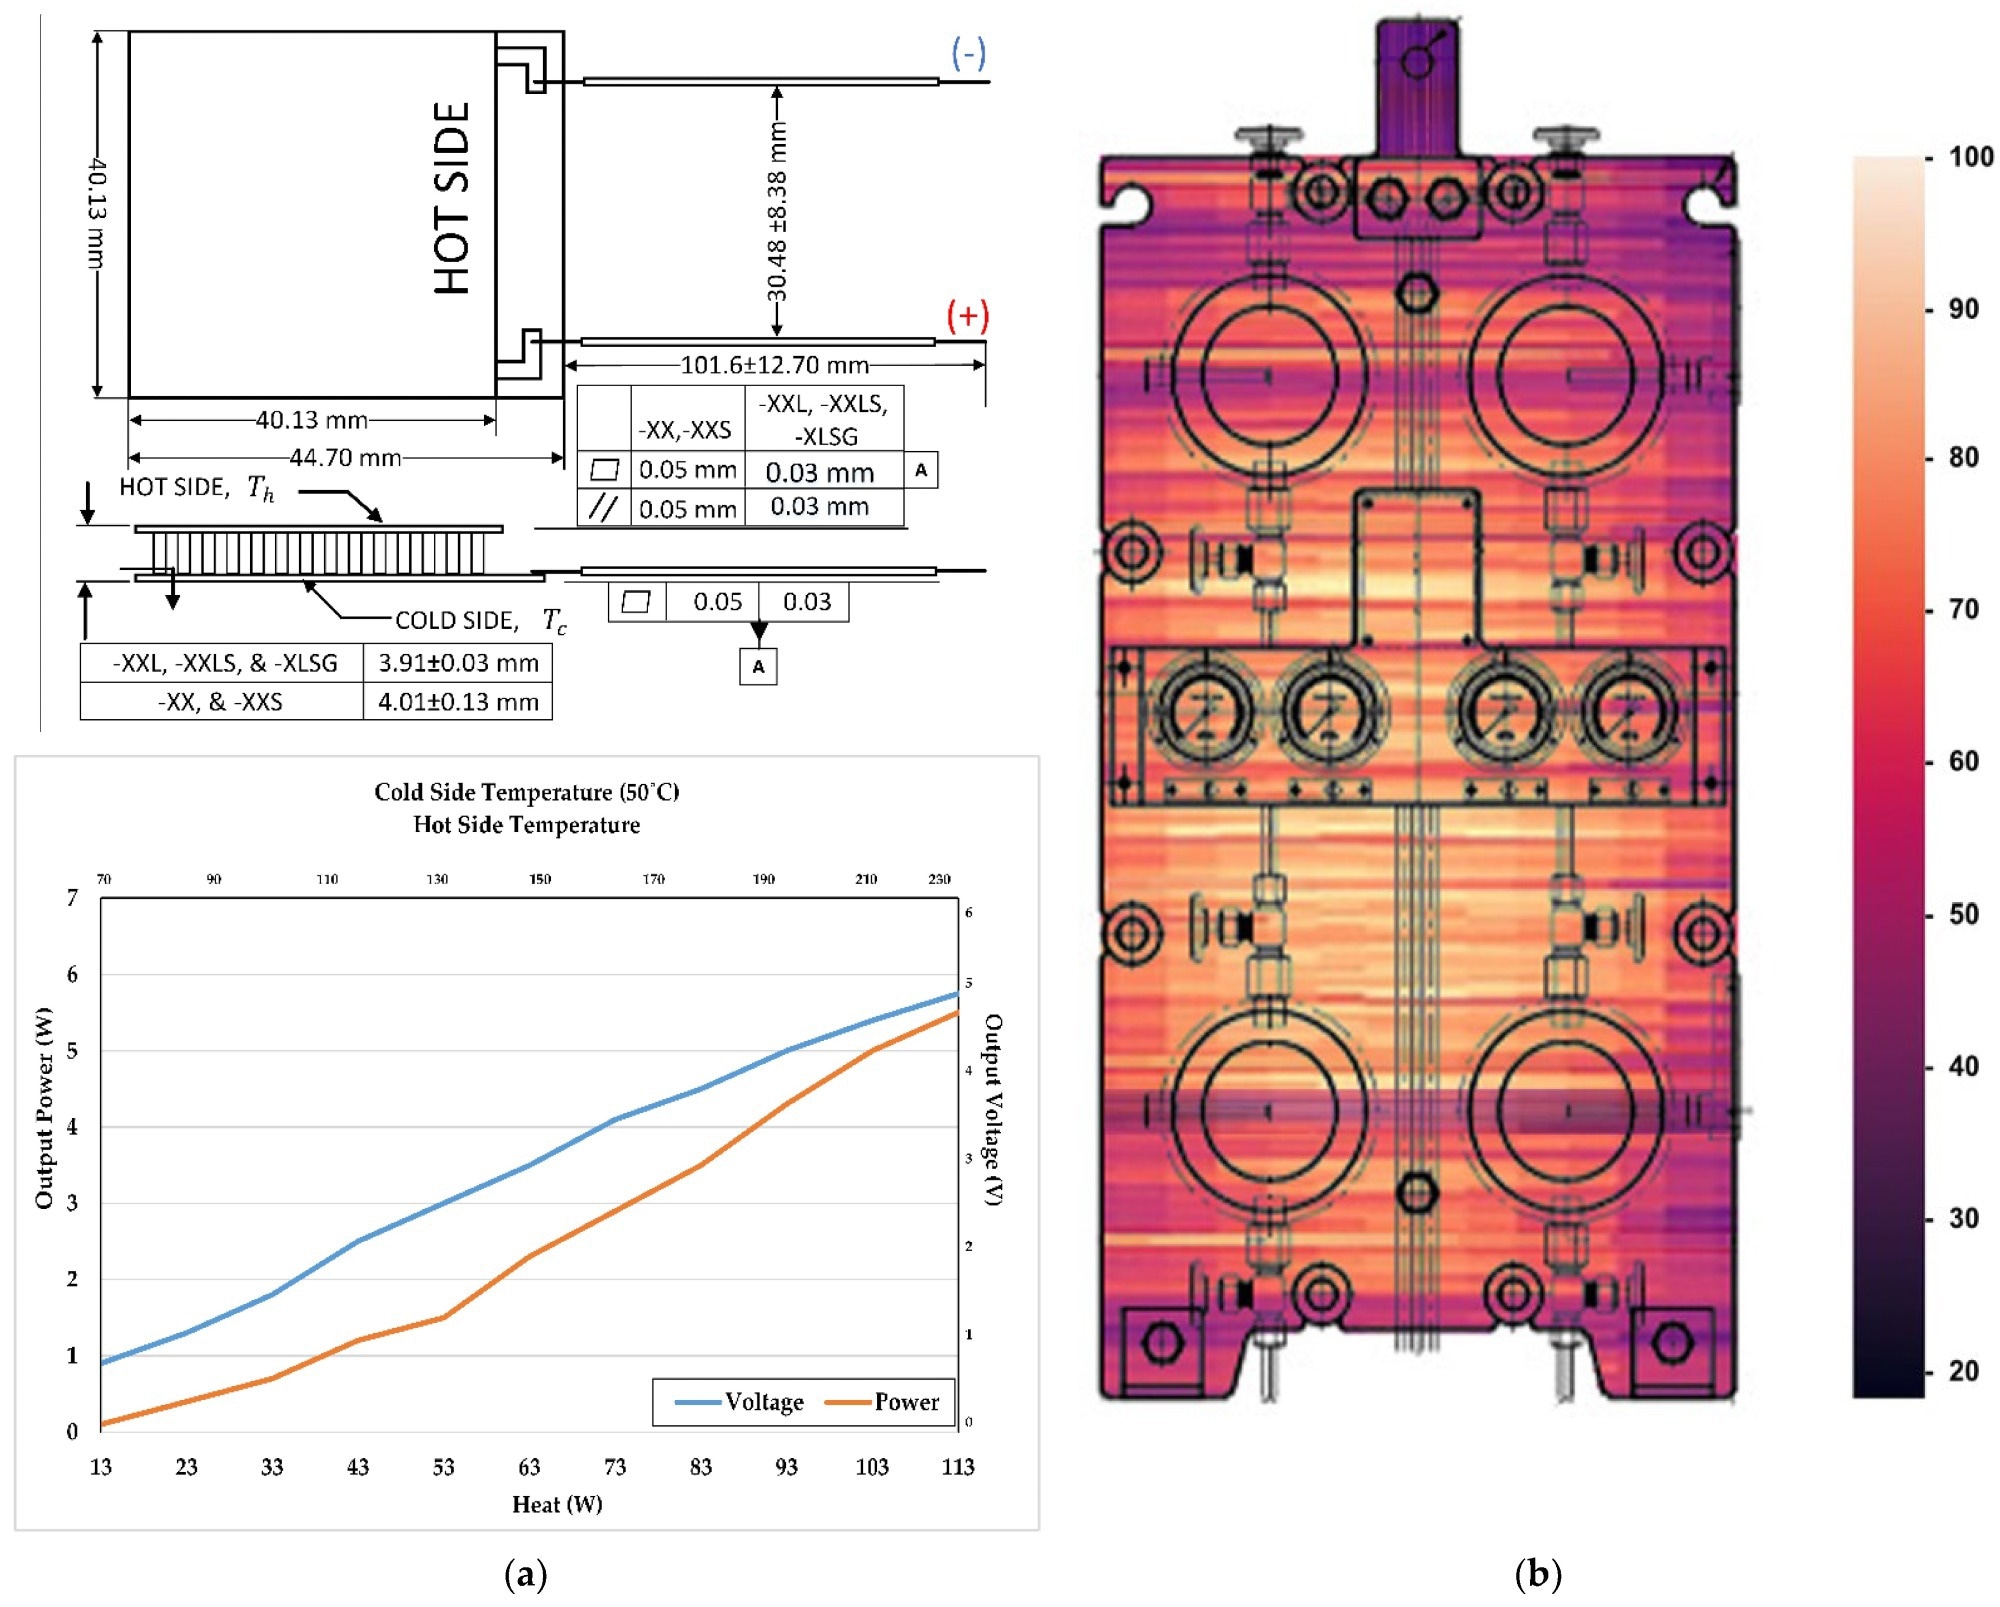 (a) The characteristics of the TEG; (b) Heat map of ME JCW heat exchanger (°C).